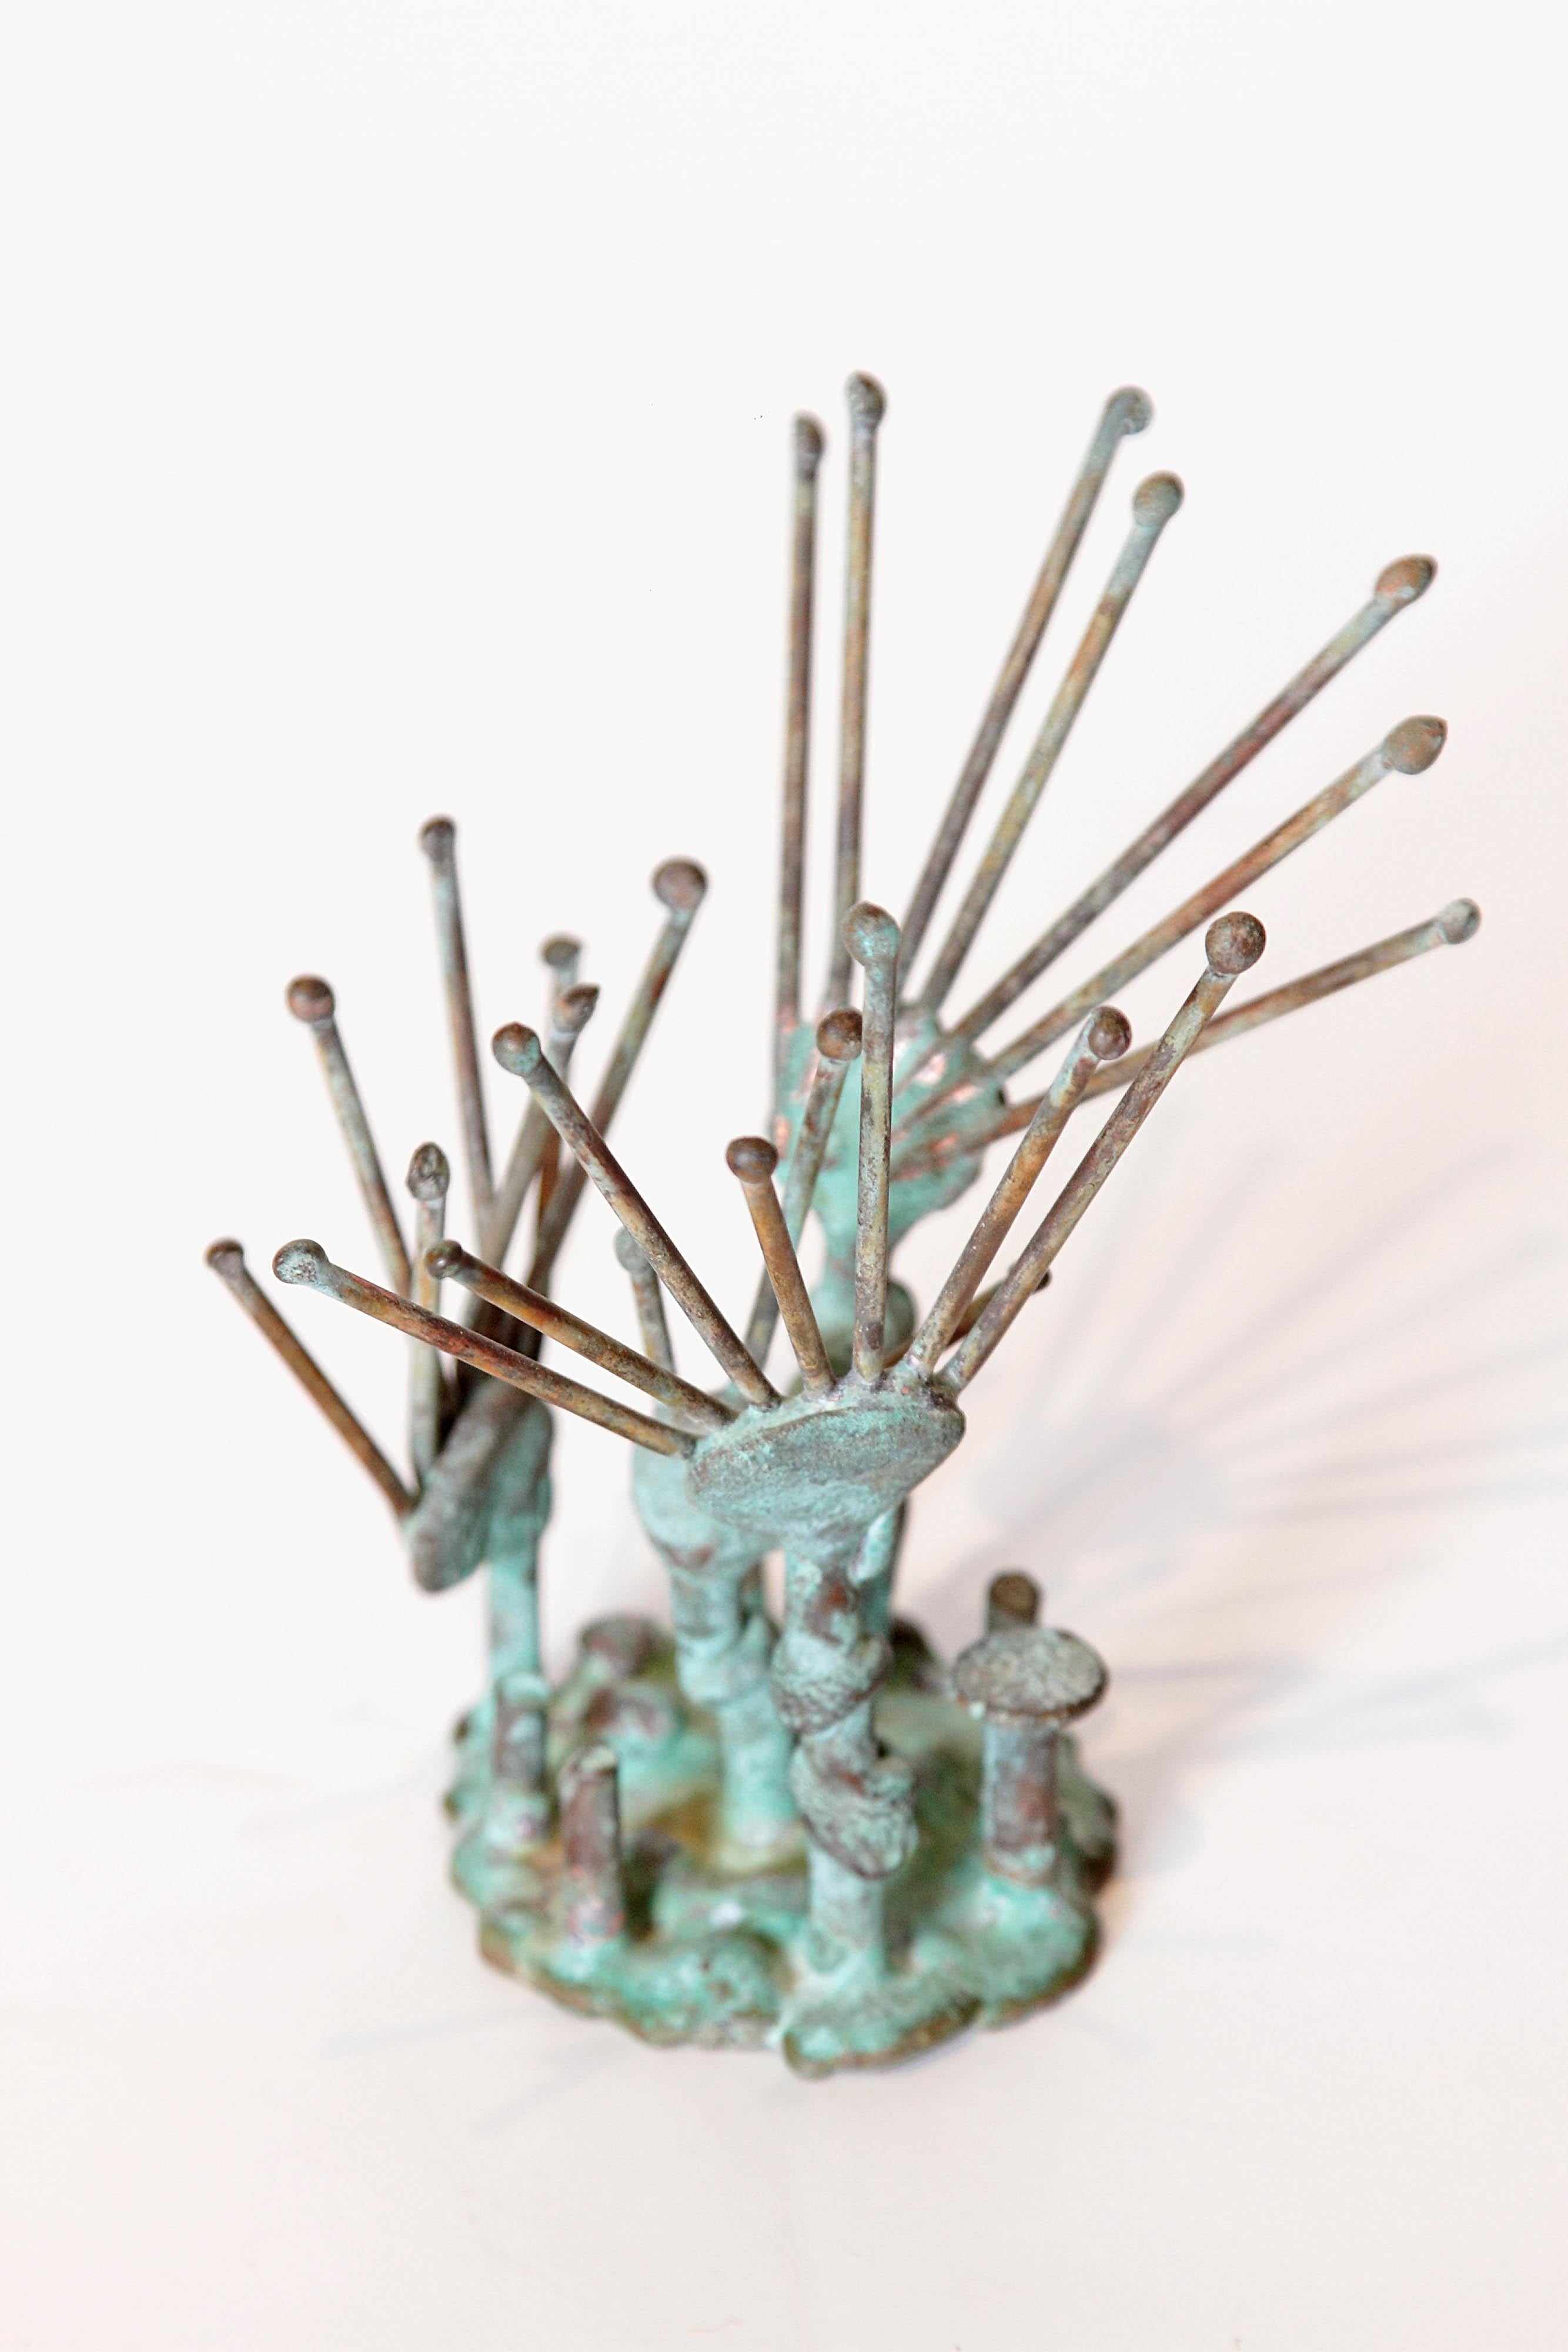 A patinated bronze sculpture by German/American Klaus Ihlenfeld, b. 1934. The sculpture is initialed K. and depicts vegetation from the sea floor. Klaus Ihlenfeld worked as a studio assistant to Harry Bertoia and went on the create pieces